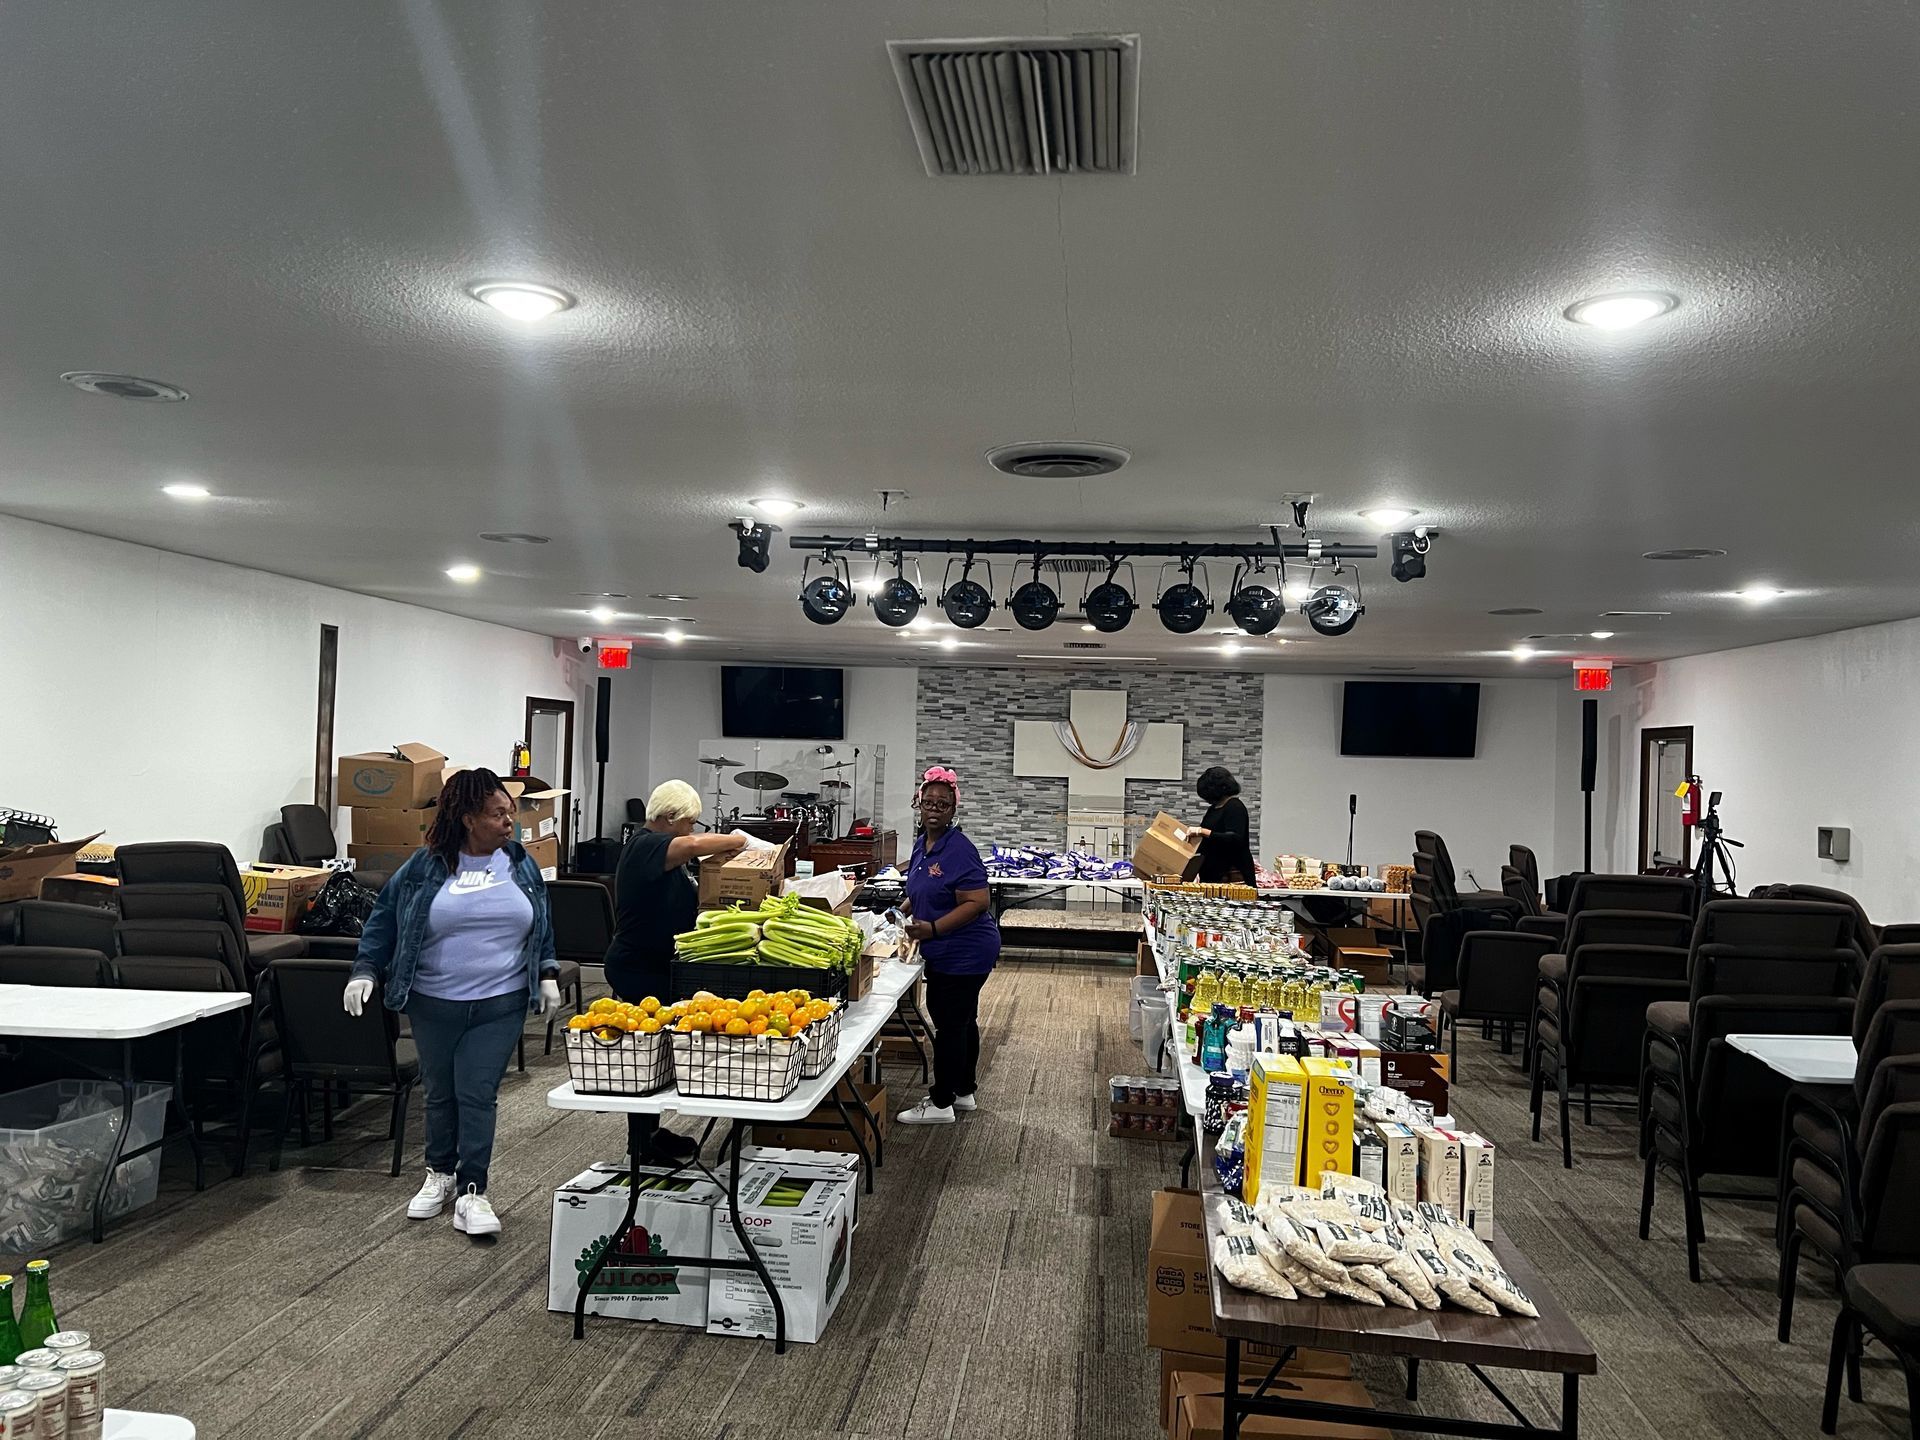 A group of people are standing around tables in a large room. - Lancaster, TX - International Harvest Fellowship Ministries